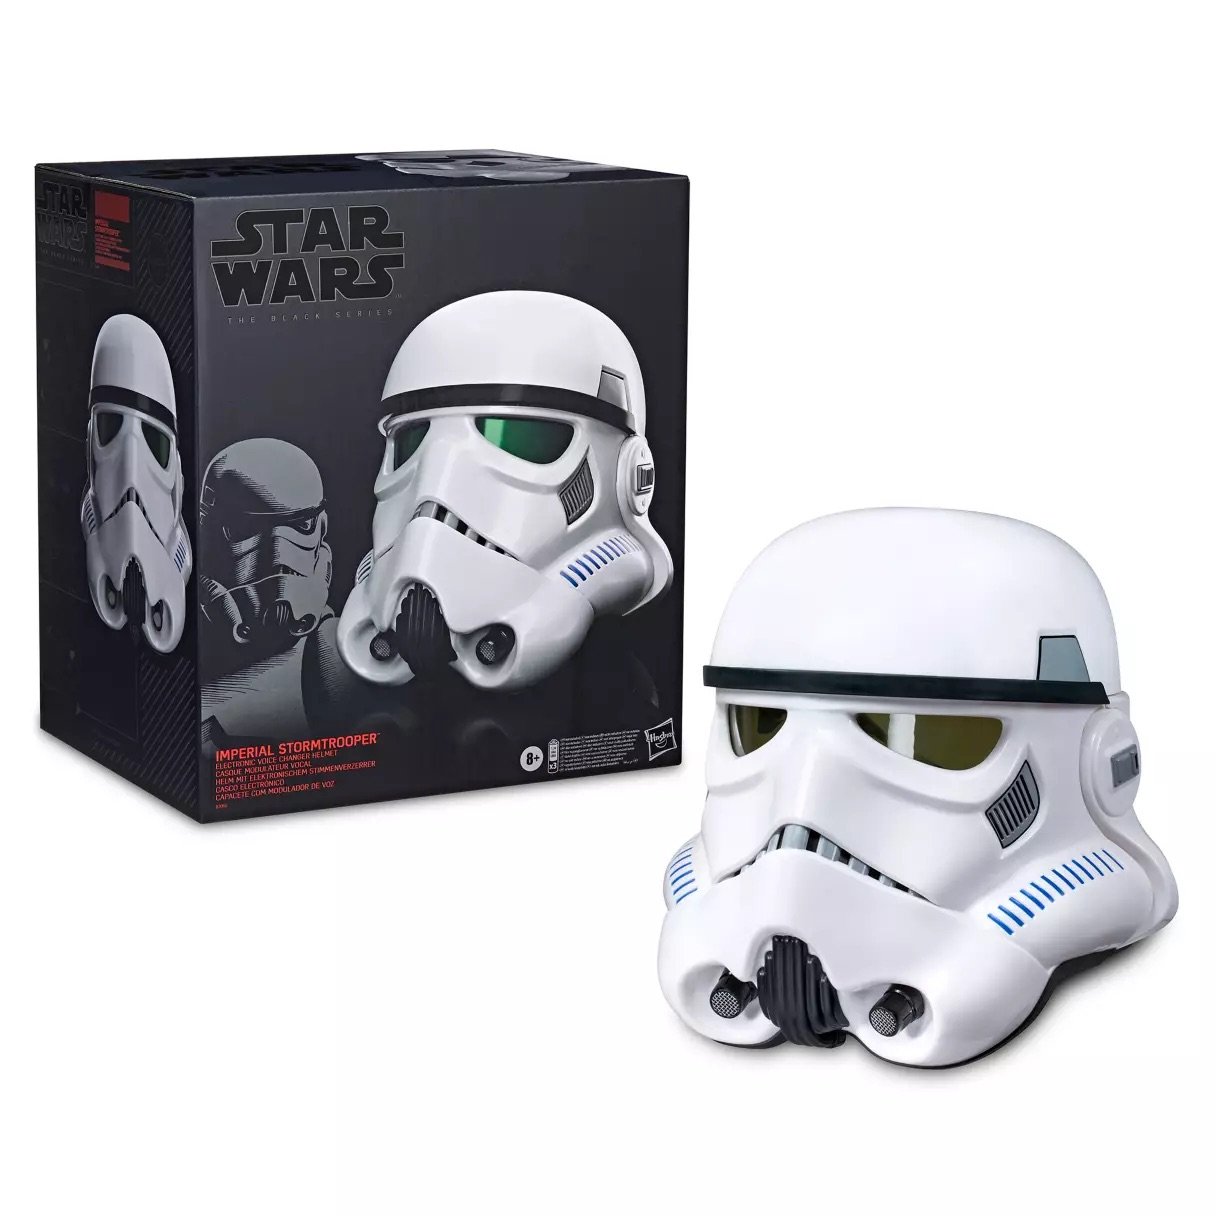 Imperial Stormtrooper Electronic Voice Changer Helmet by Hasbro – Star Wars- Rogue One – The Black Series Disney Store May the 4th Be With You Imperial Stormtrooper Helmet Merchandise April 2024.jpeg